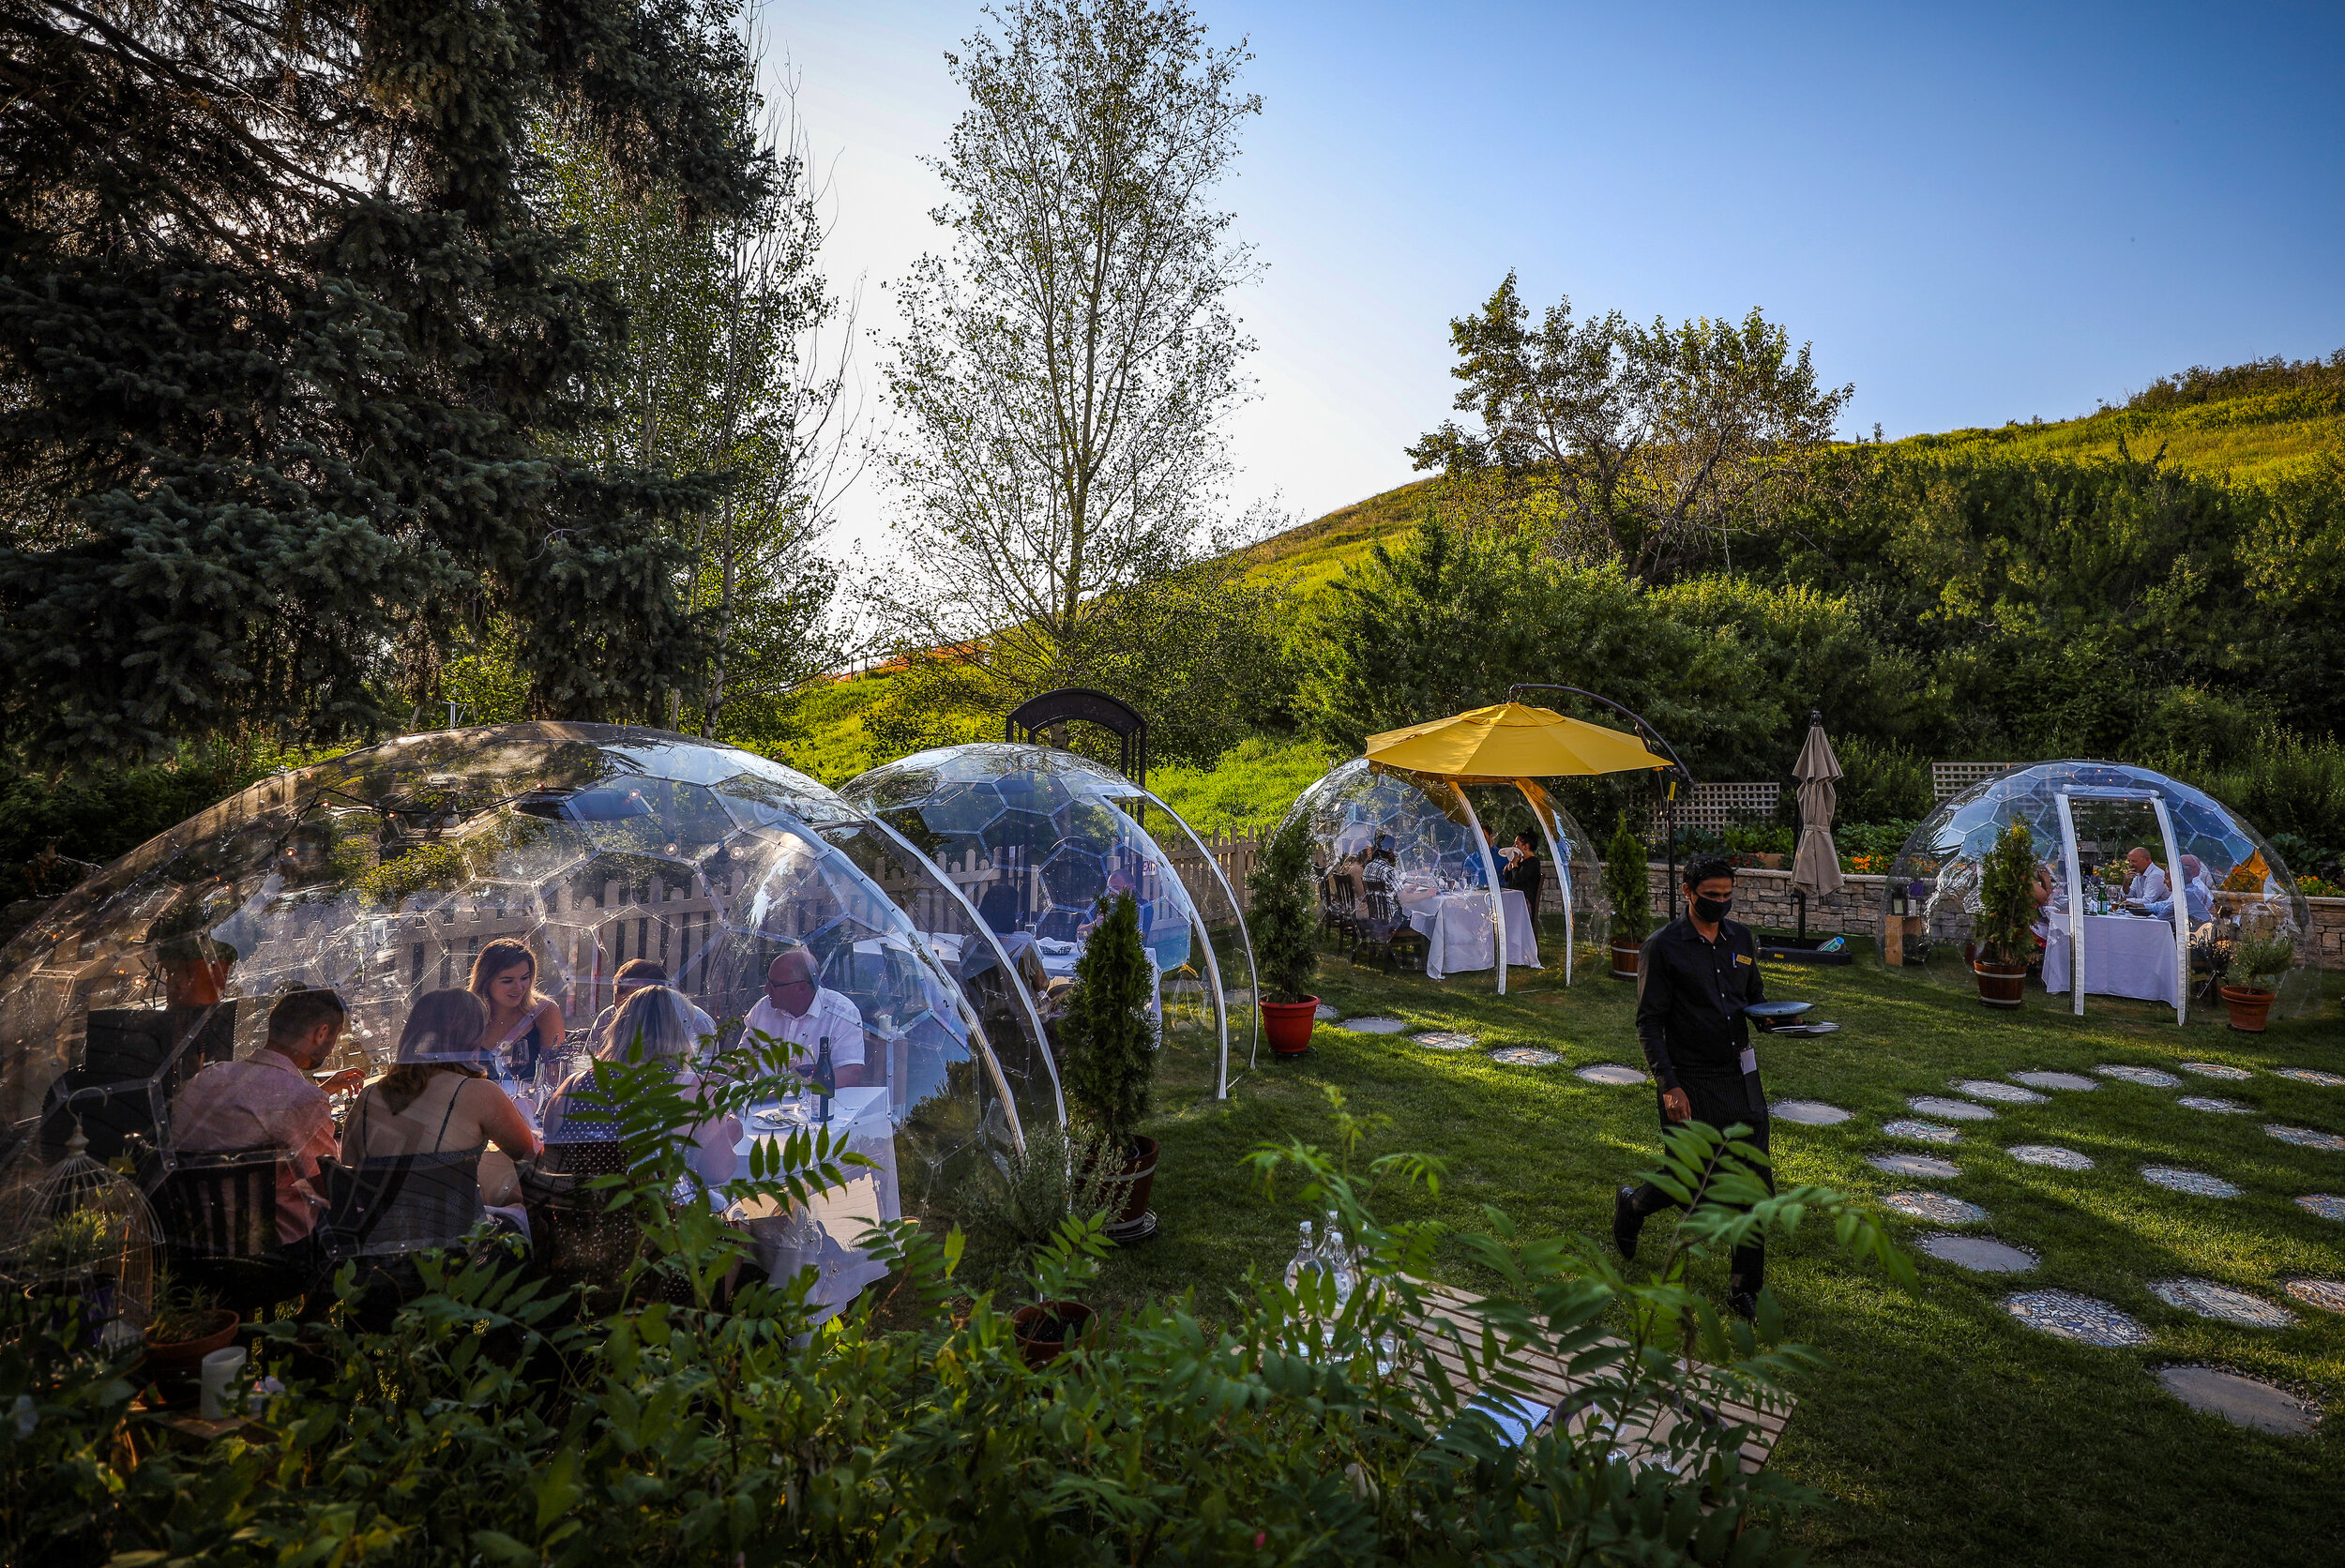  On a day when Alberta recorded 513 new cases of COVID-19, patrons enjoy a meal inside pop-up garden globes at Bow Valley Ranche Restaurant in Calgary, Alberta. 